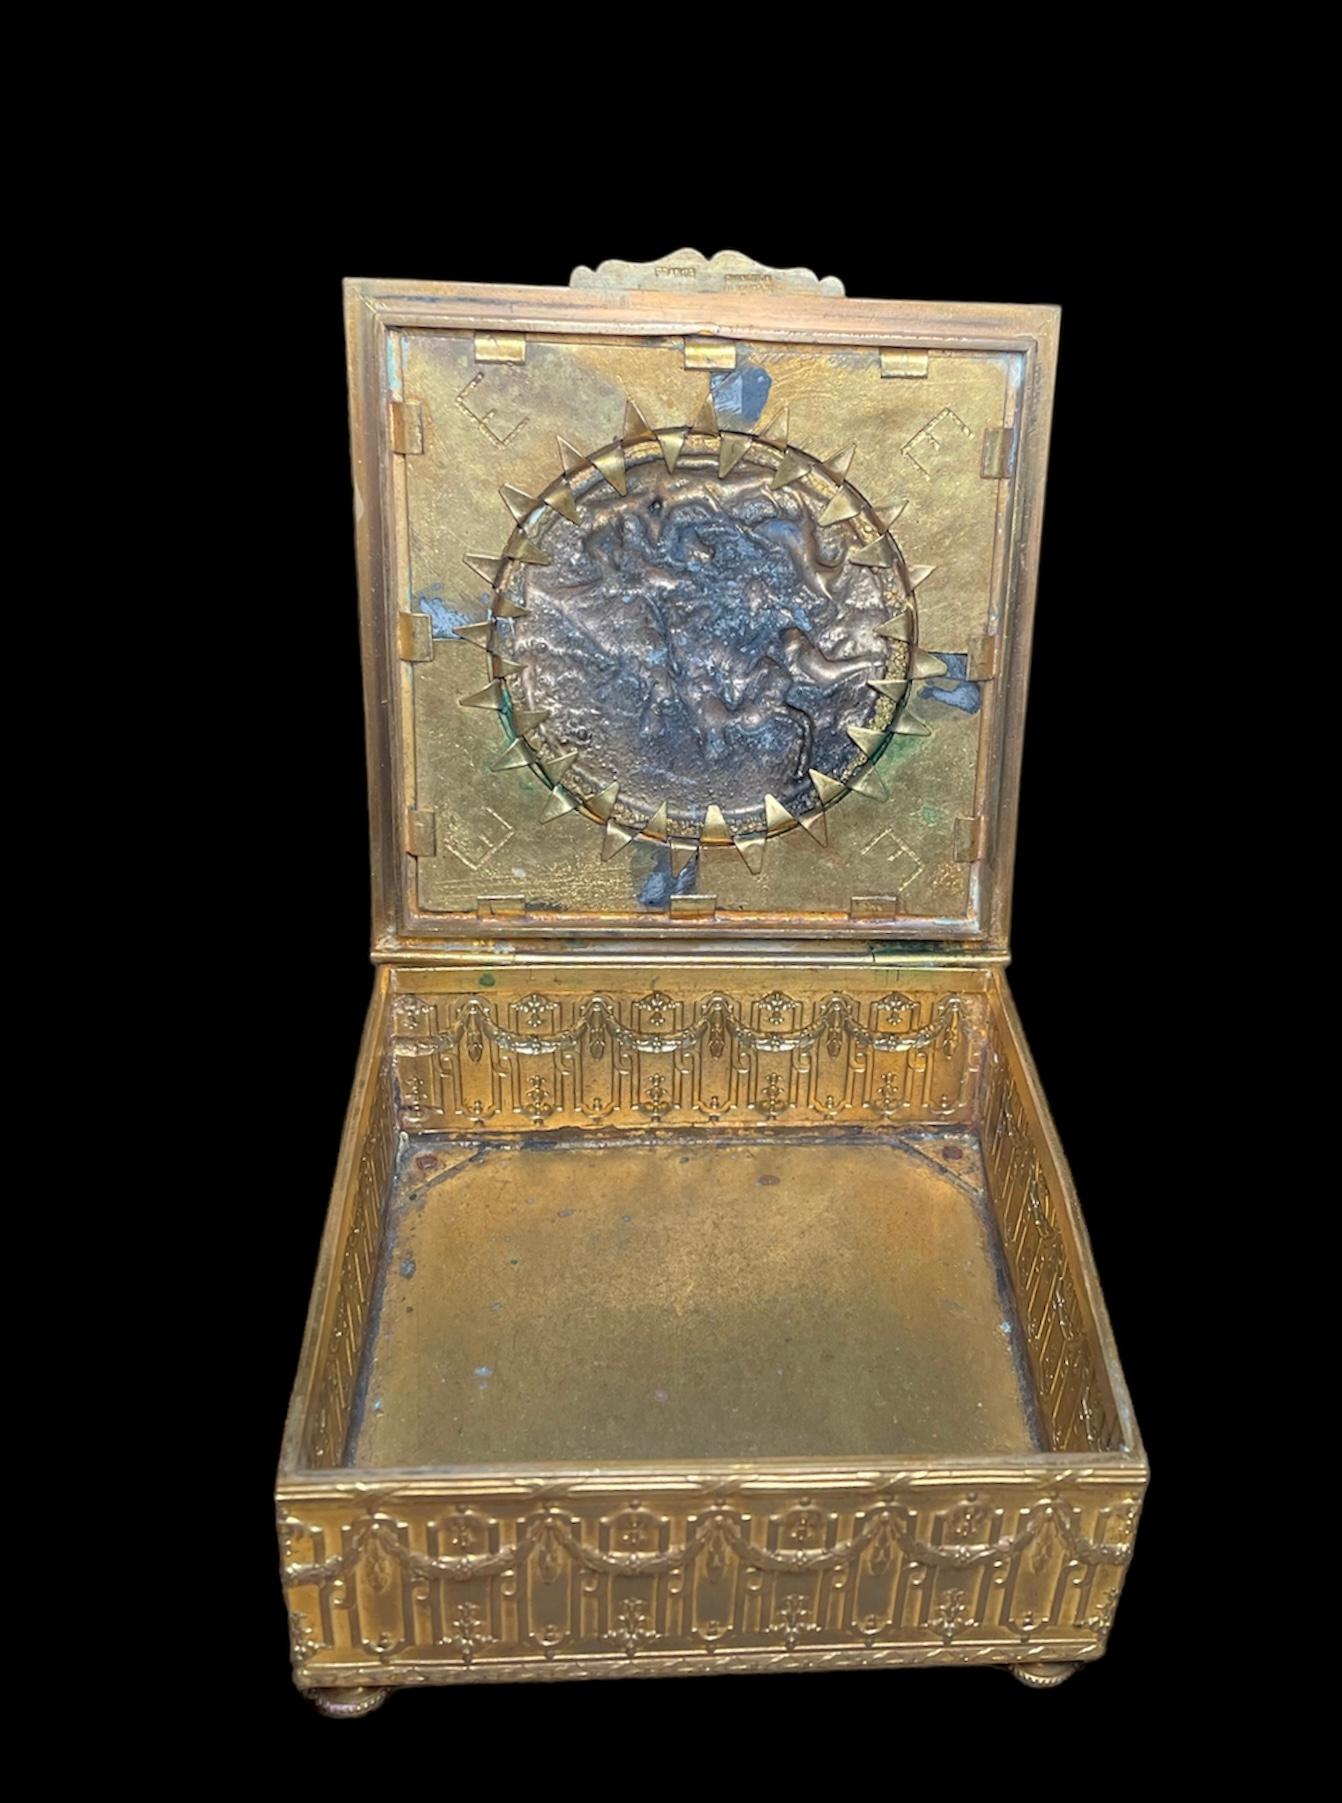 This is a French bronze metal square hinged lidded box. It depicts a lid decorated with an 18th century country relief scene of two ladies and a gentleman playing with a dog while another dog is barking to some birds. The relief is enhanced by the